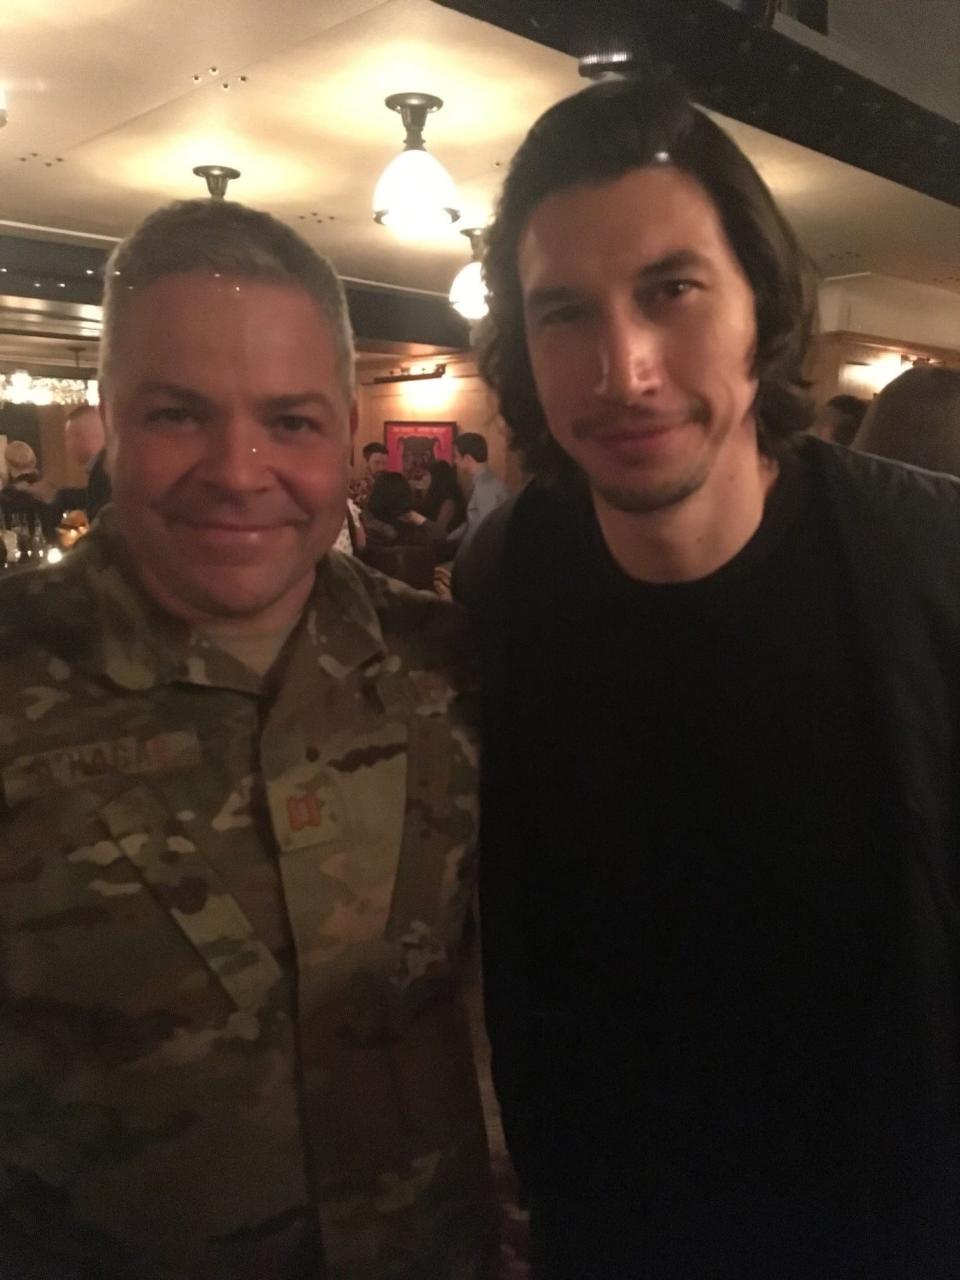 Career Air Force officer Michael O'Hagan of Byram, shown here with actor Adam Driver at an event for Driver's Arts in the Armed Forces nonprofit. O'Hagan will see a world-premiere staged reading of his play, "Black Friday," on Nov. 12 at the Parsippany Arts Center. Proceeds from the event will benefit the Boonton Elks Club "Army of Hope" nonprofit that aids veterans in need.